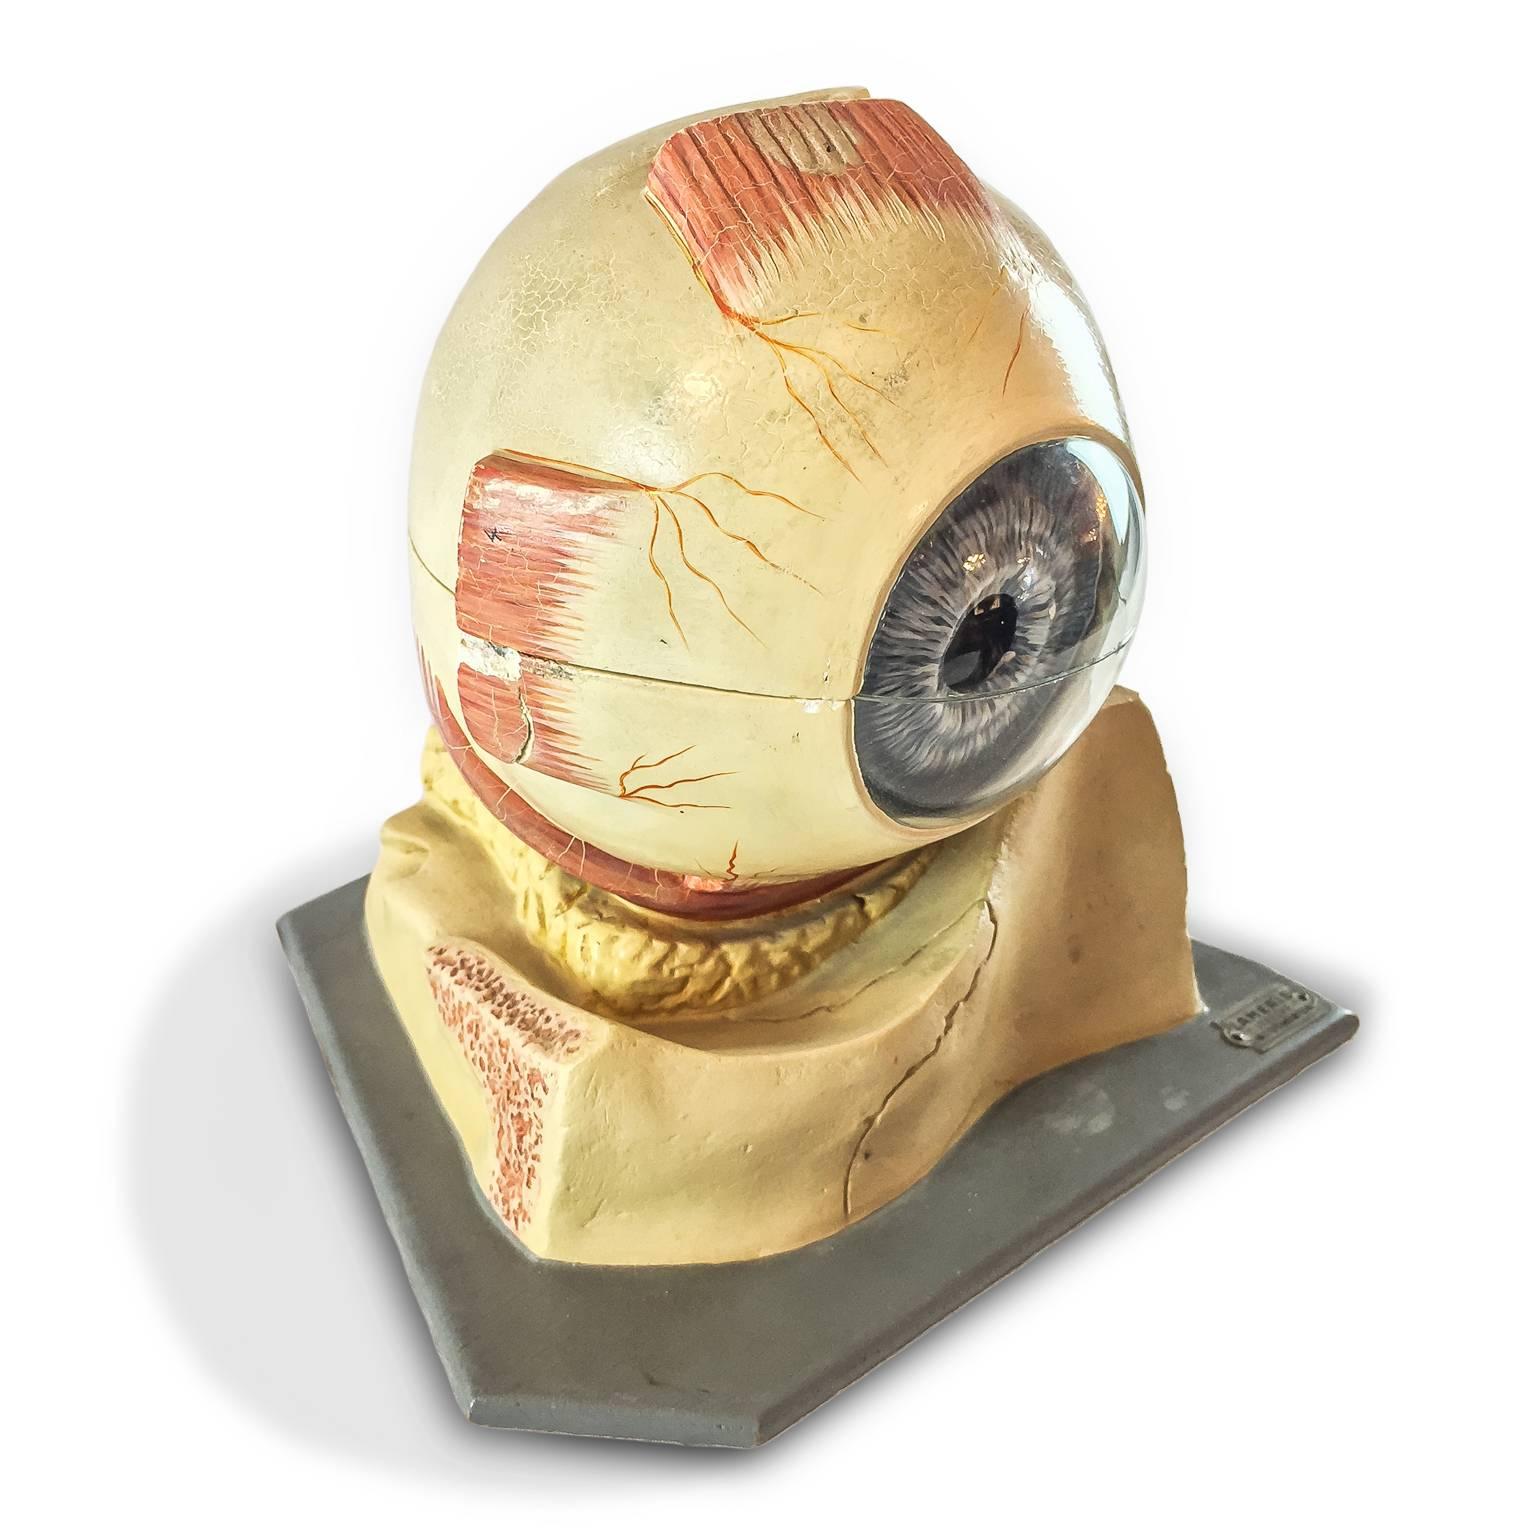 Antique anatomical decomposable model representing a human eye, painted plaster and glass, of Flemish origin, as per the label on the grey painted wooden basement, Laméris Utrecht Instrumenten. 

Dating back to the first half of 20th century, it